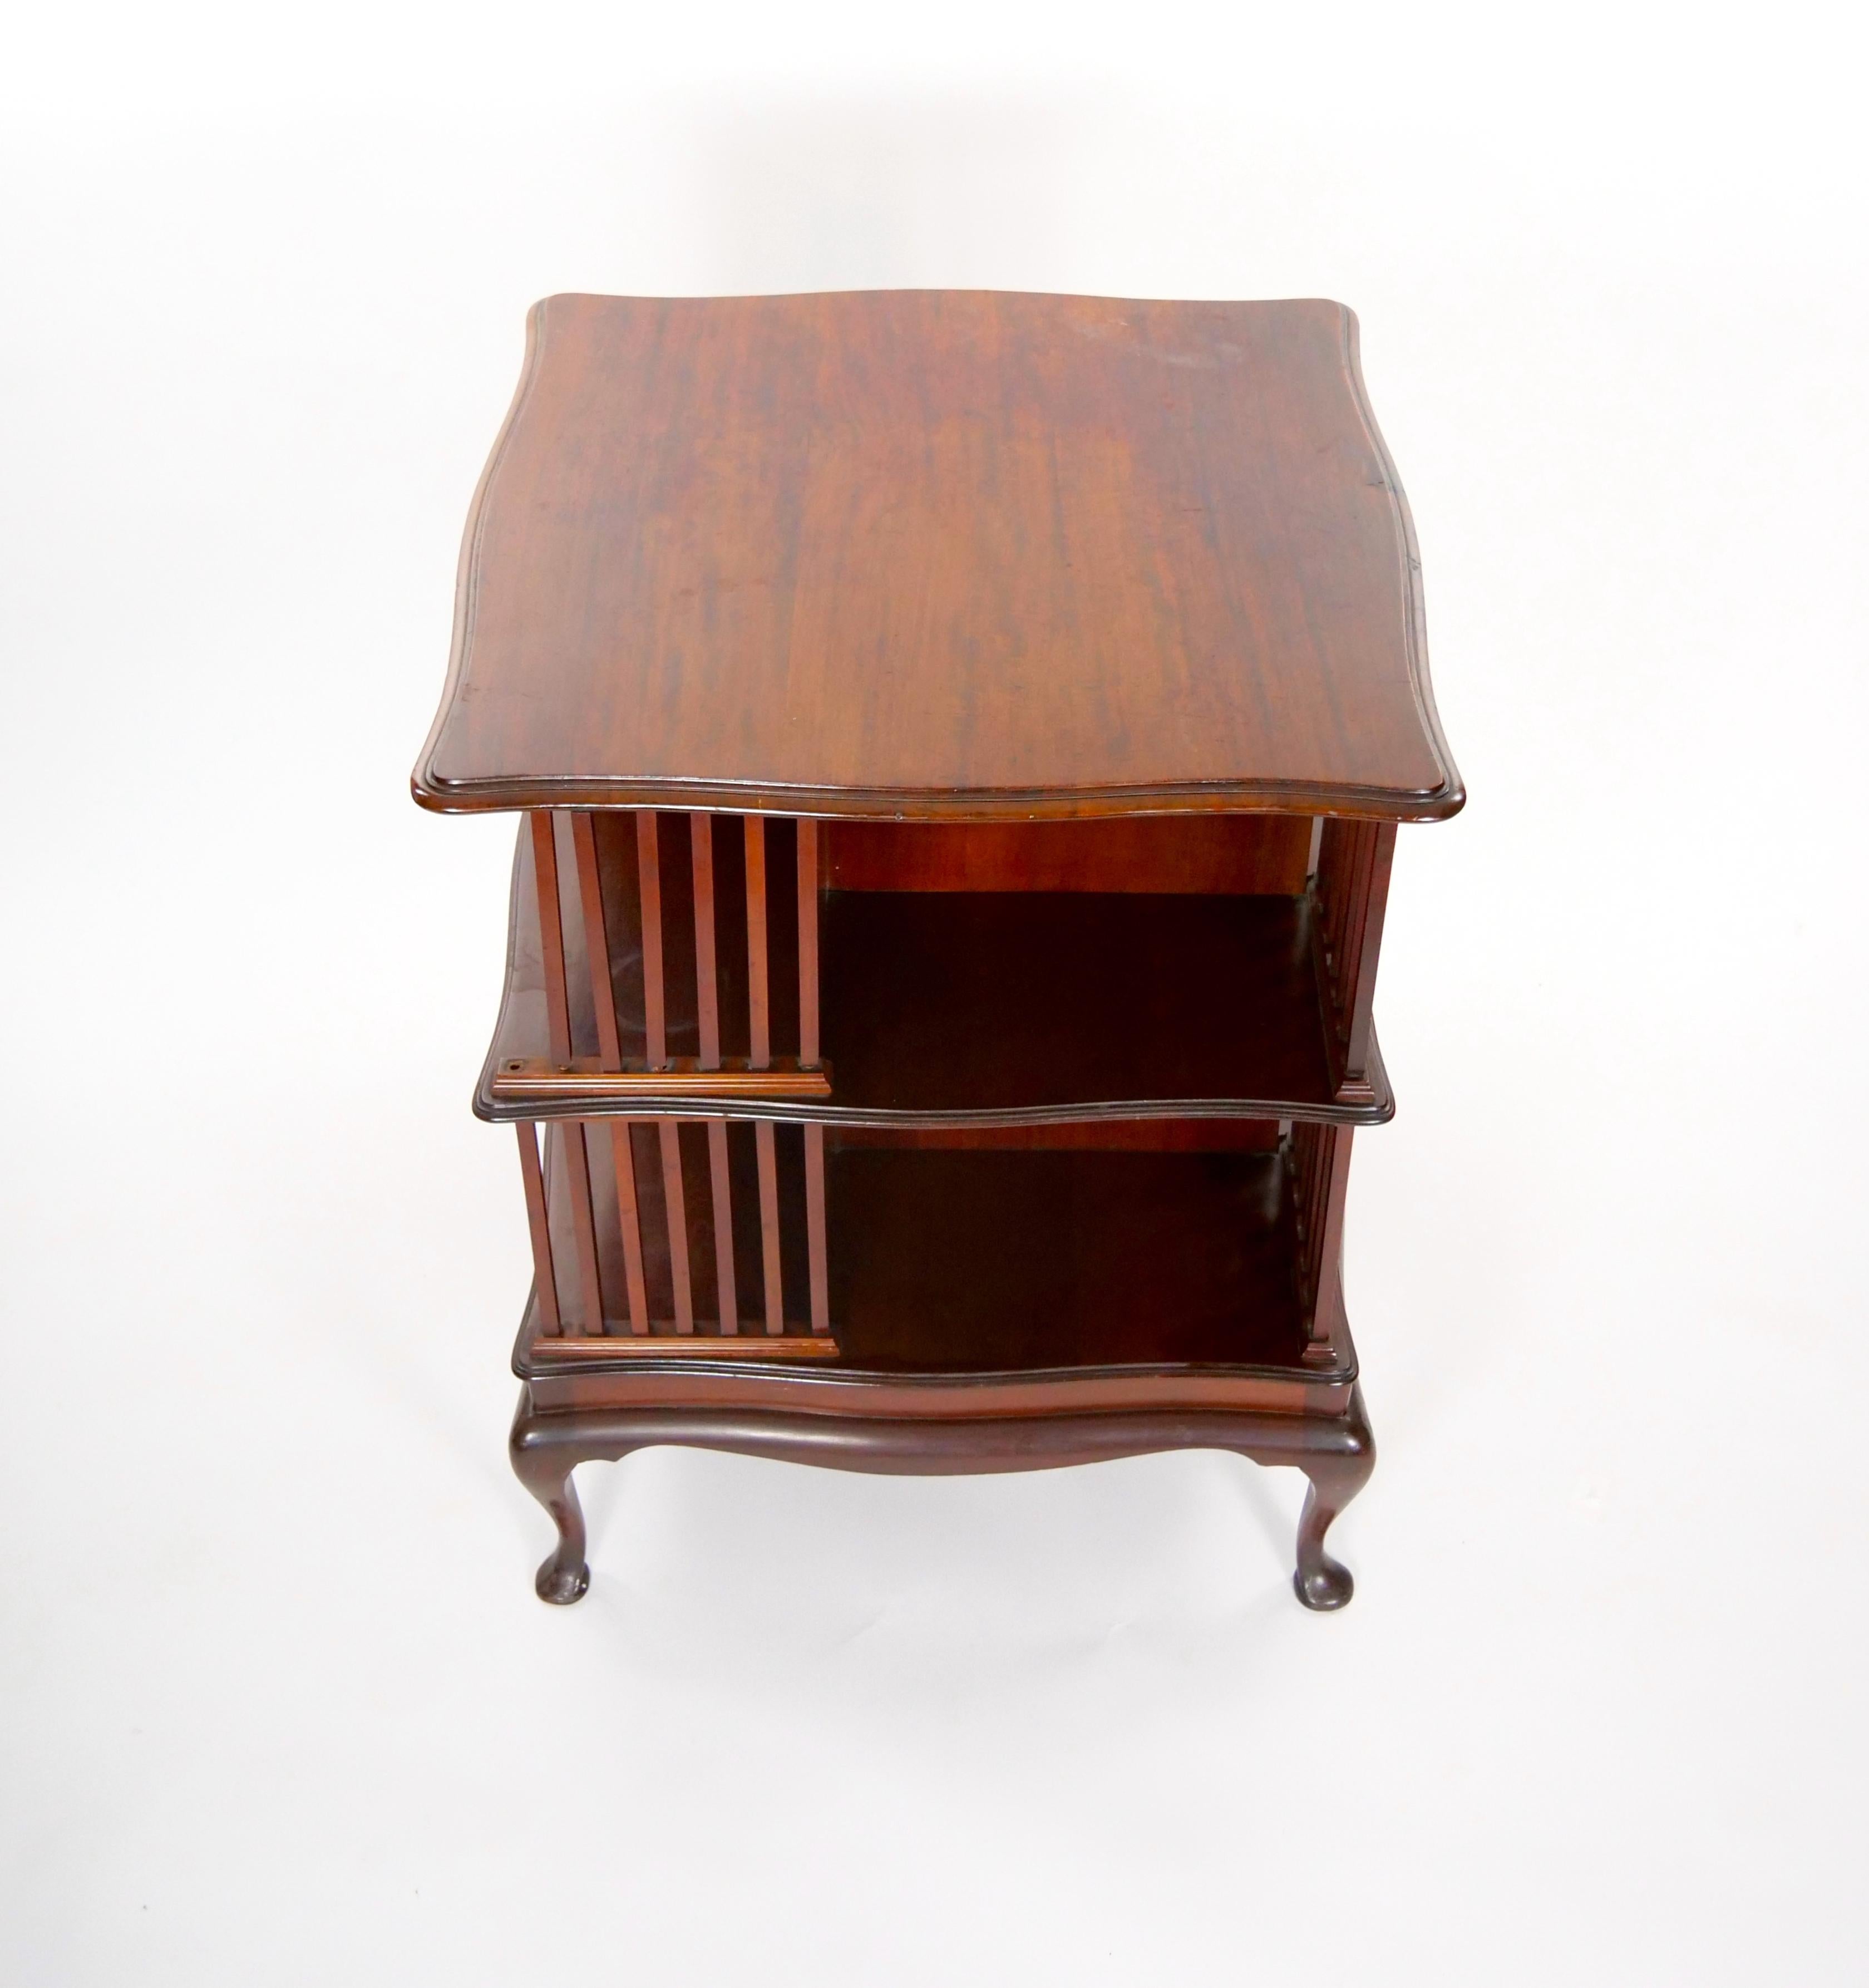 Step into the charm of English antiquity with this exquisite revolving bookcase/shelf, exquisitely crafted in stained mahogany wood. The rich, warm tones of the wood evoke a sense of timeless elegance and sophistication. Designed with practicality